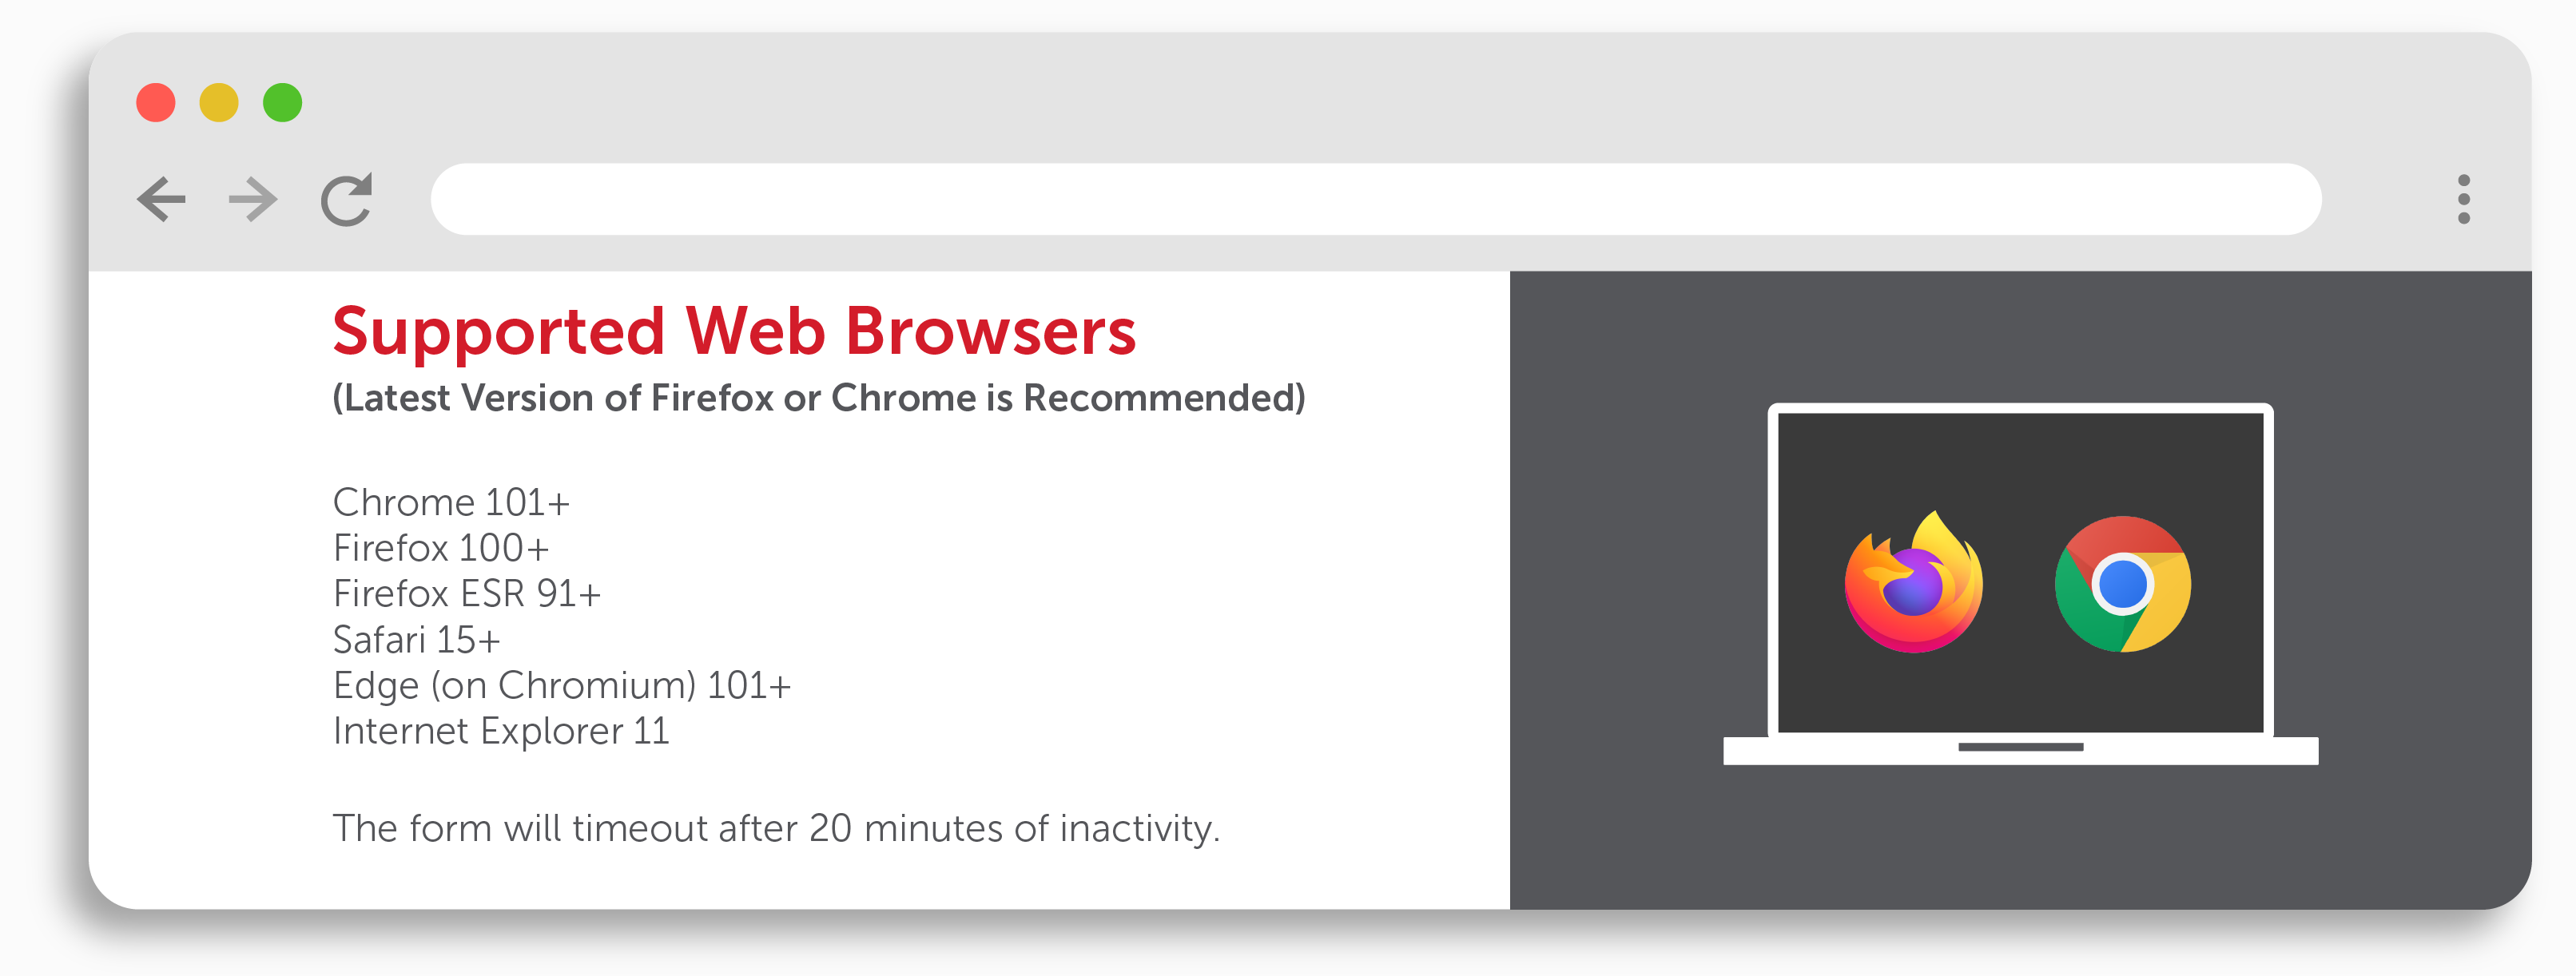 Supported Web Browsers Chrome 101+, Firefox 100+, Firefox ESR 91+, Safari 15+, Edge (On Chromium) 101+, IE 11 Form will timeout after 20 minutes